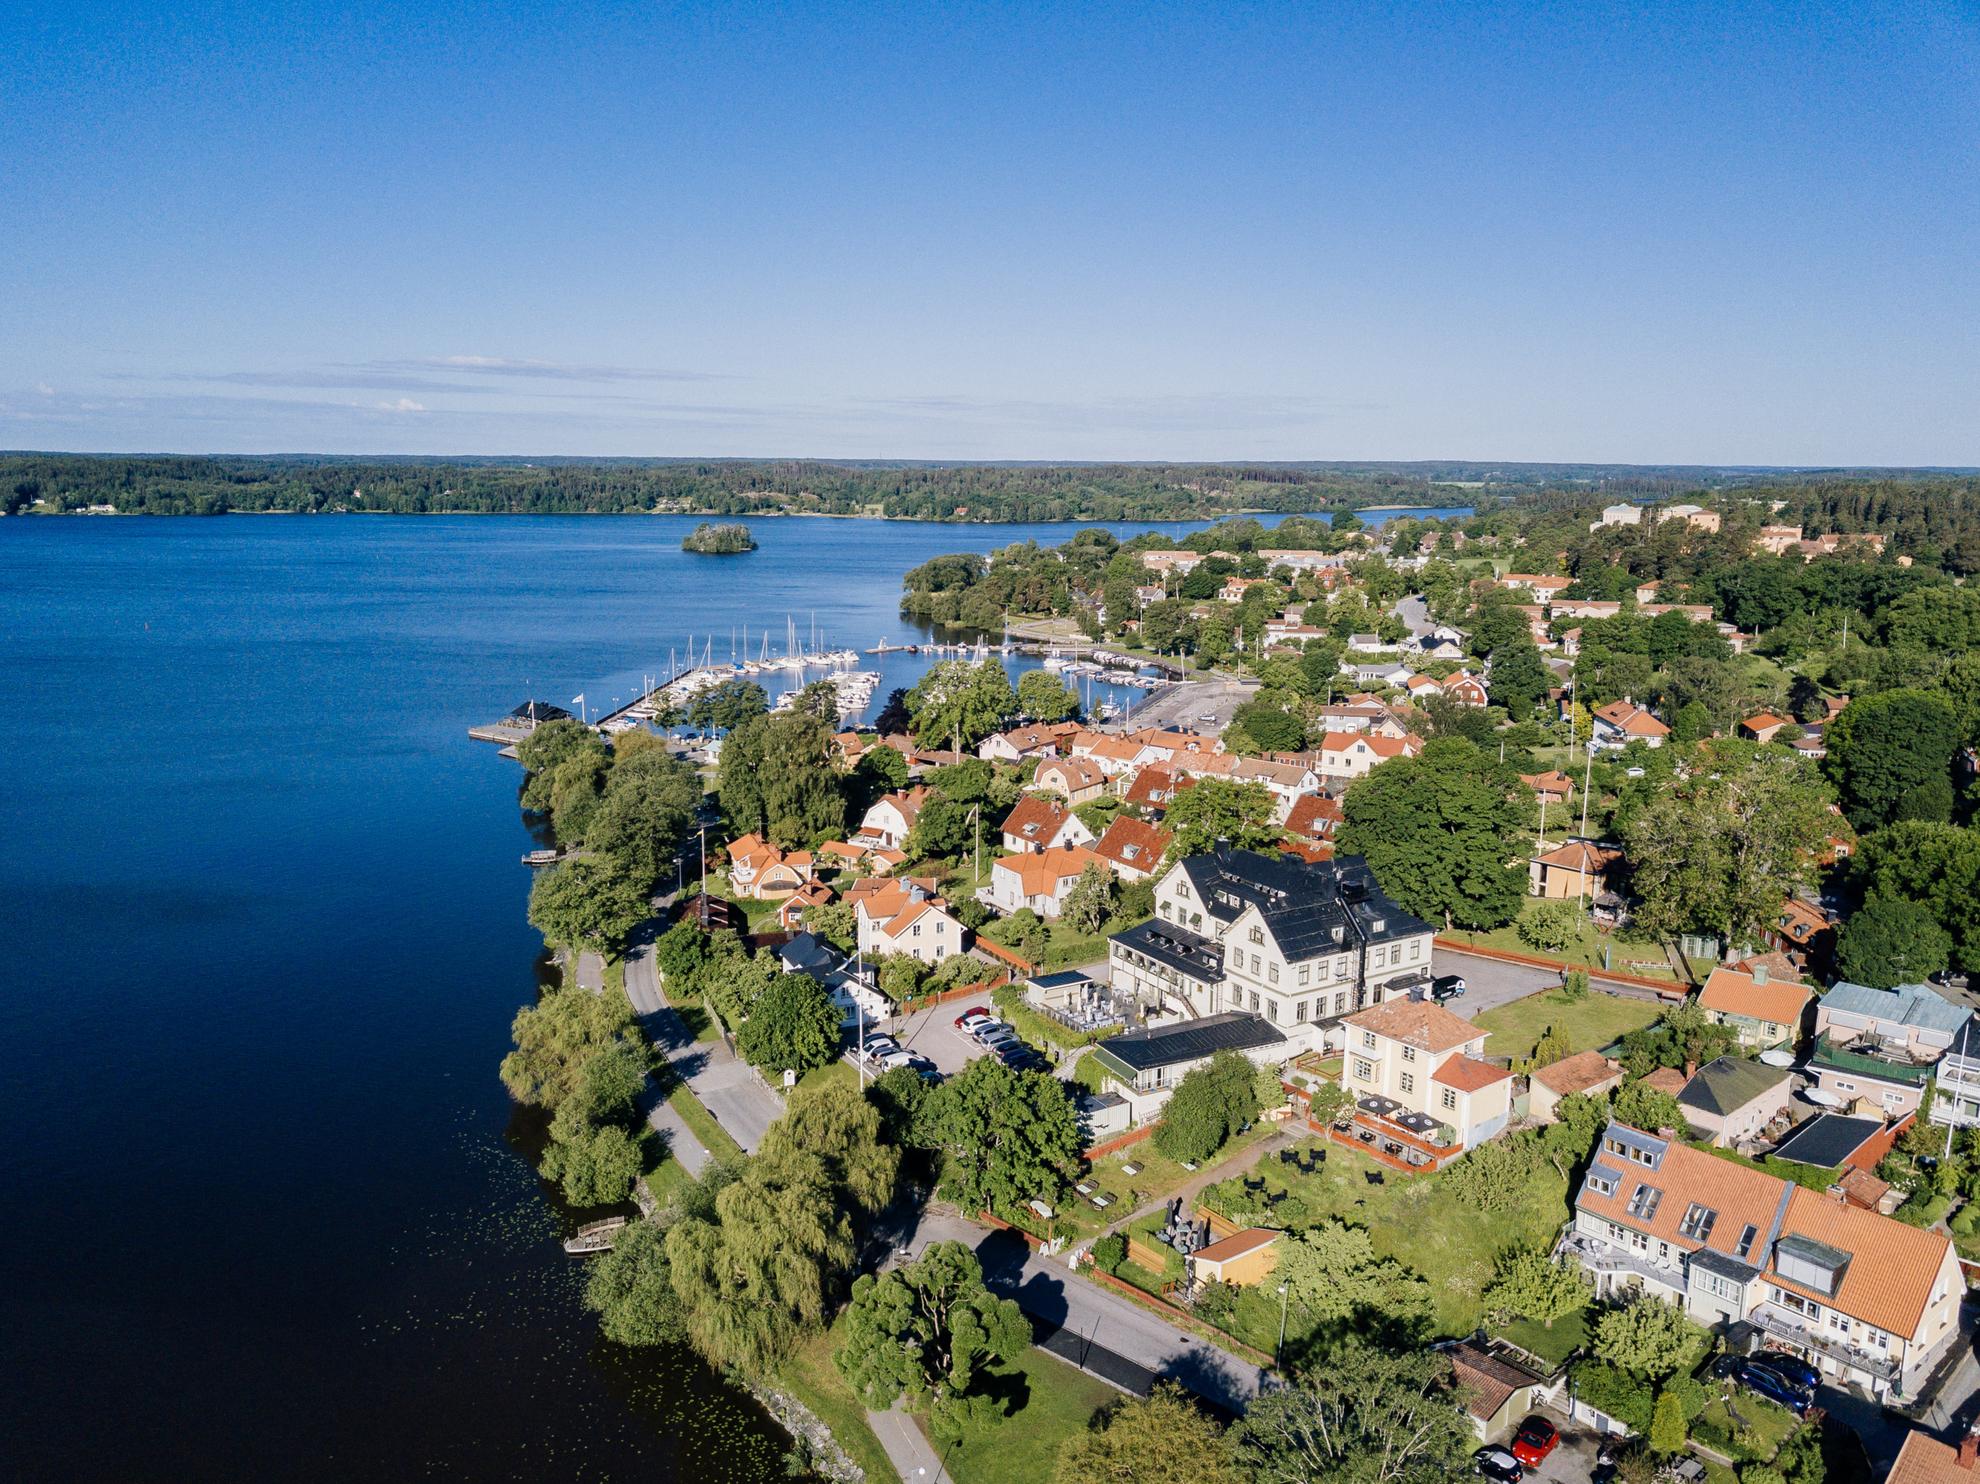 Aerial view of houses and a road next to lake Mälaren during the summer.